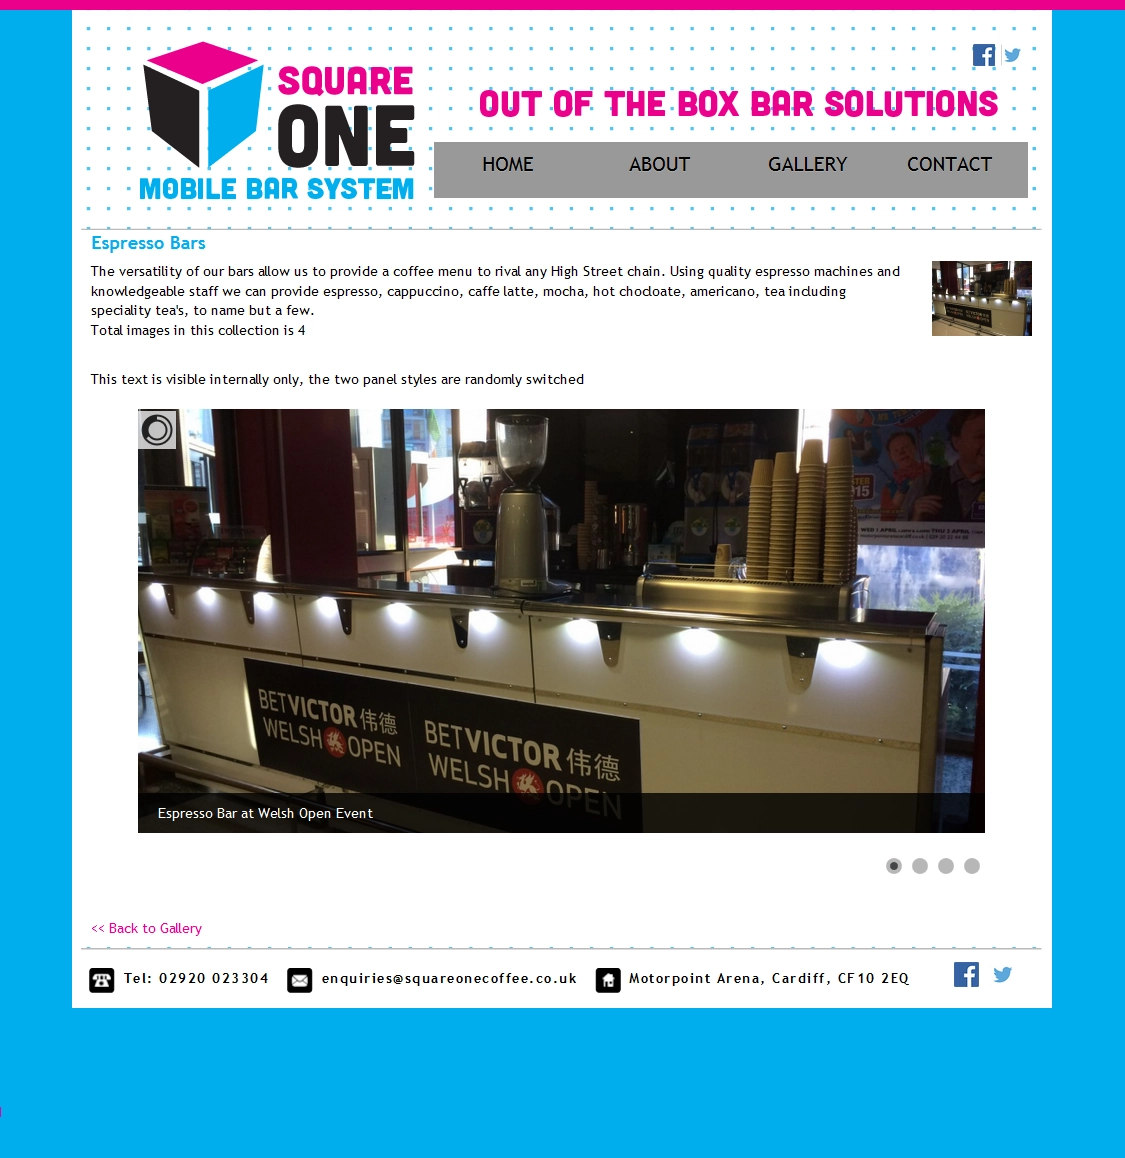 An image from the Square One Coffee website